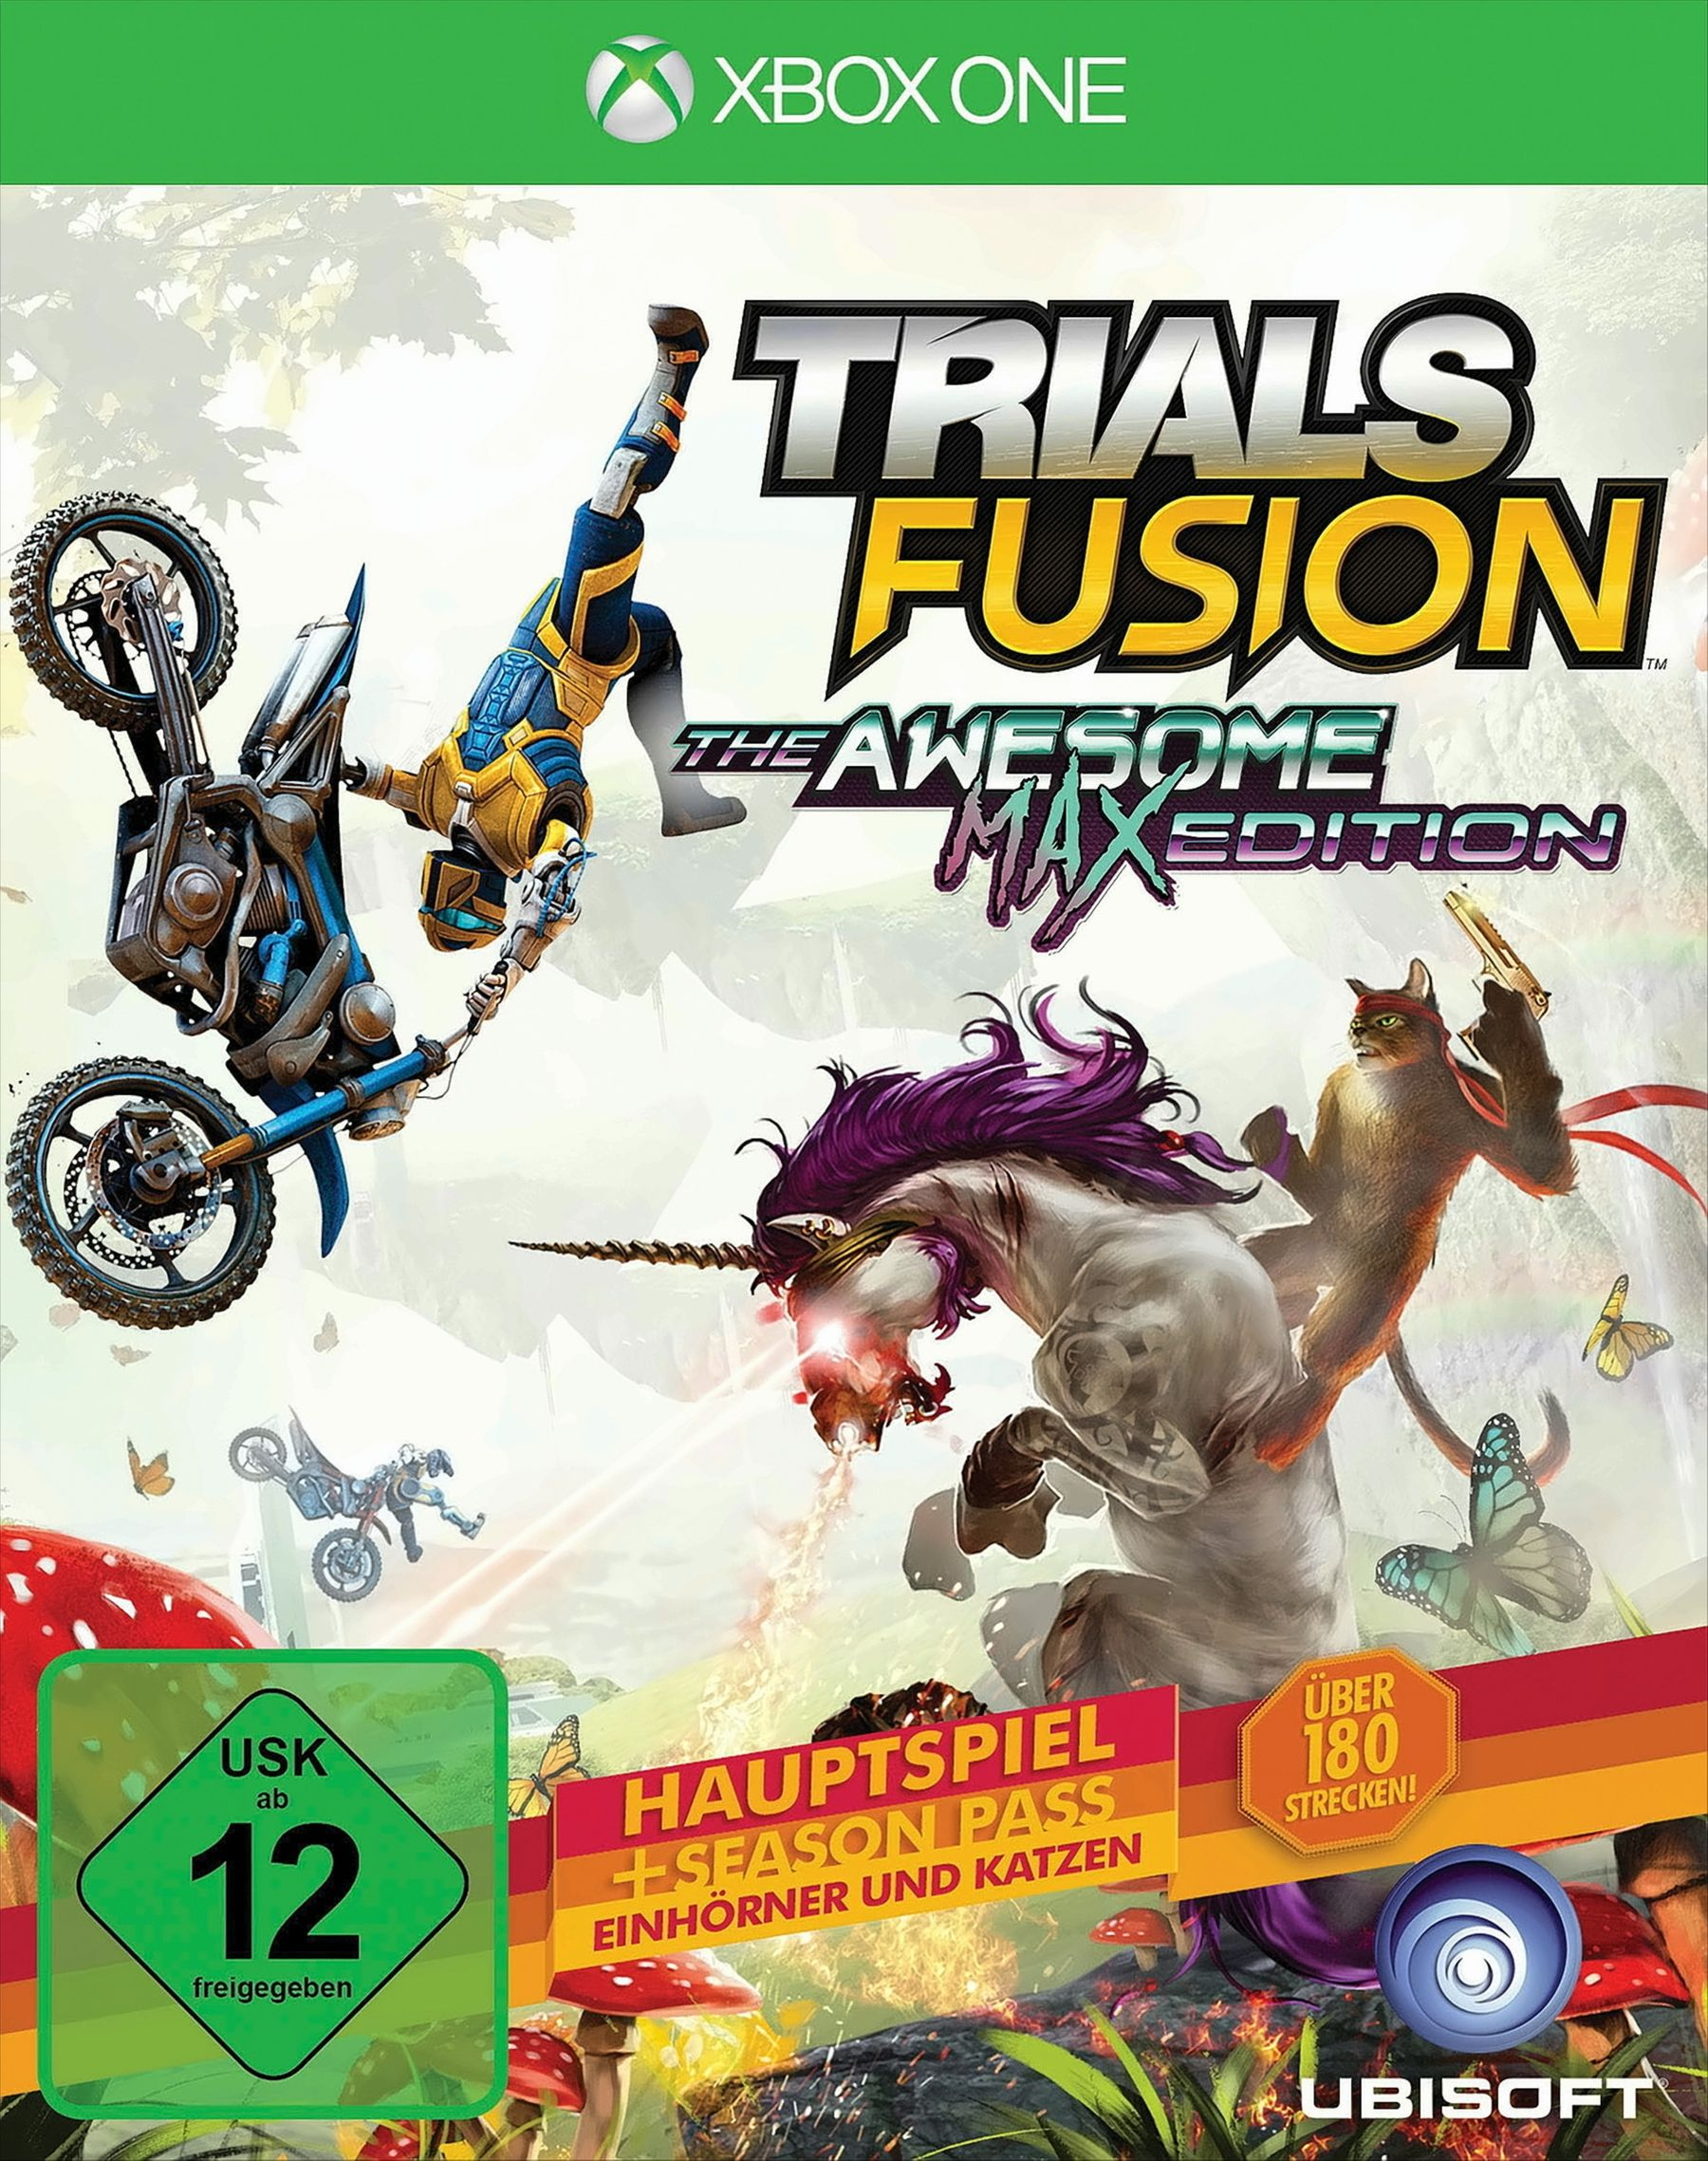 Trials Fusion - The [Xbox One] Awesome Edition - Max